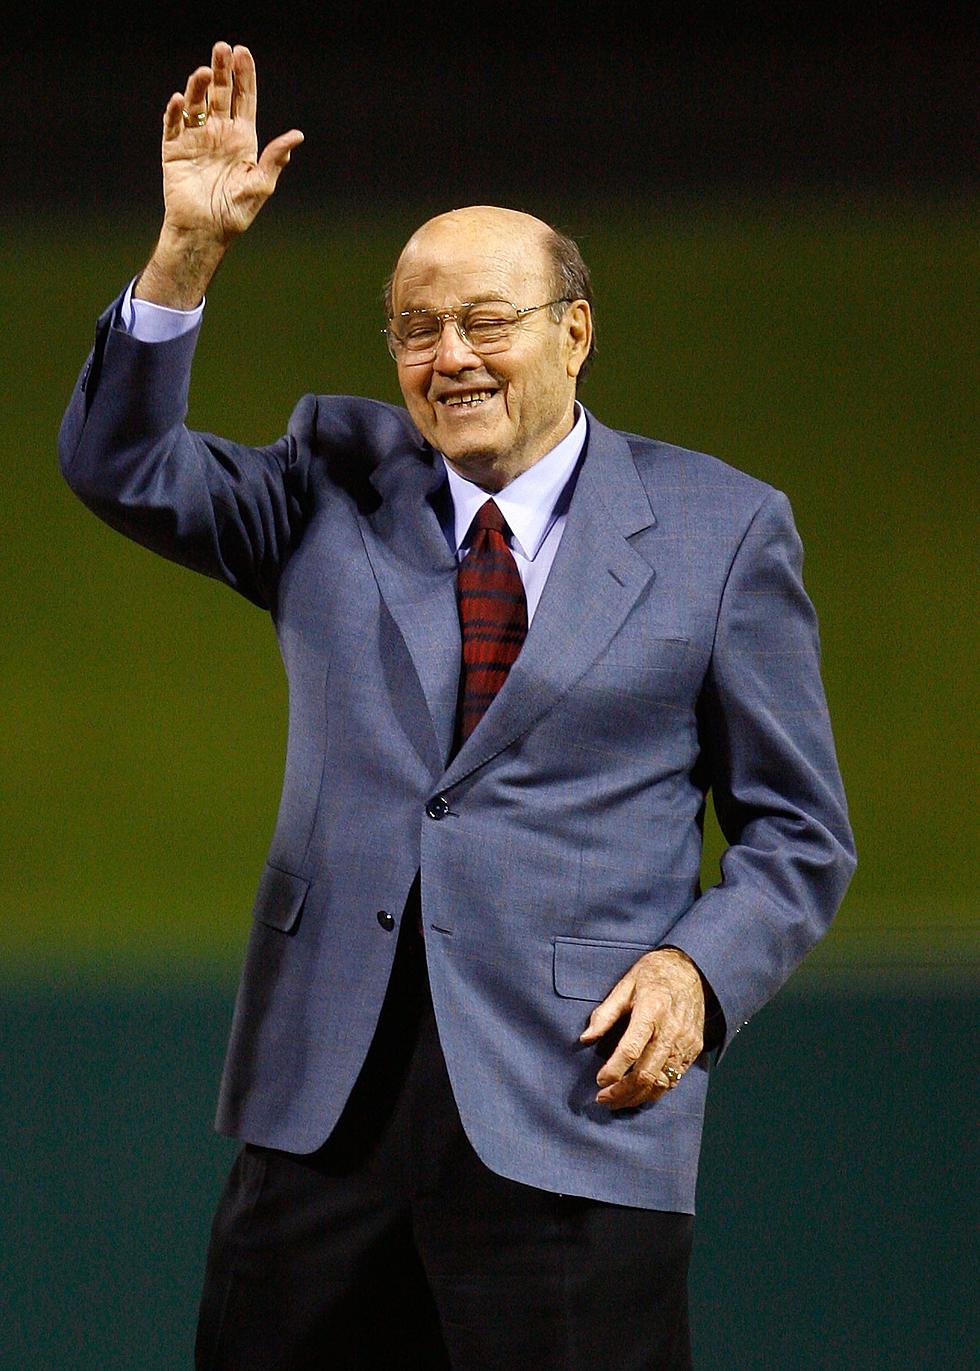 Joe Garagiola Announces Retirement After An Amazing 58 Years of Broadcasting (VIDEO)